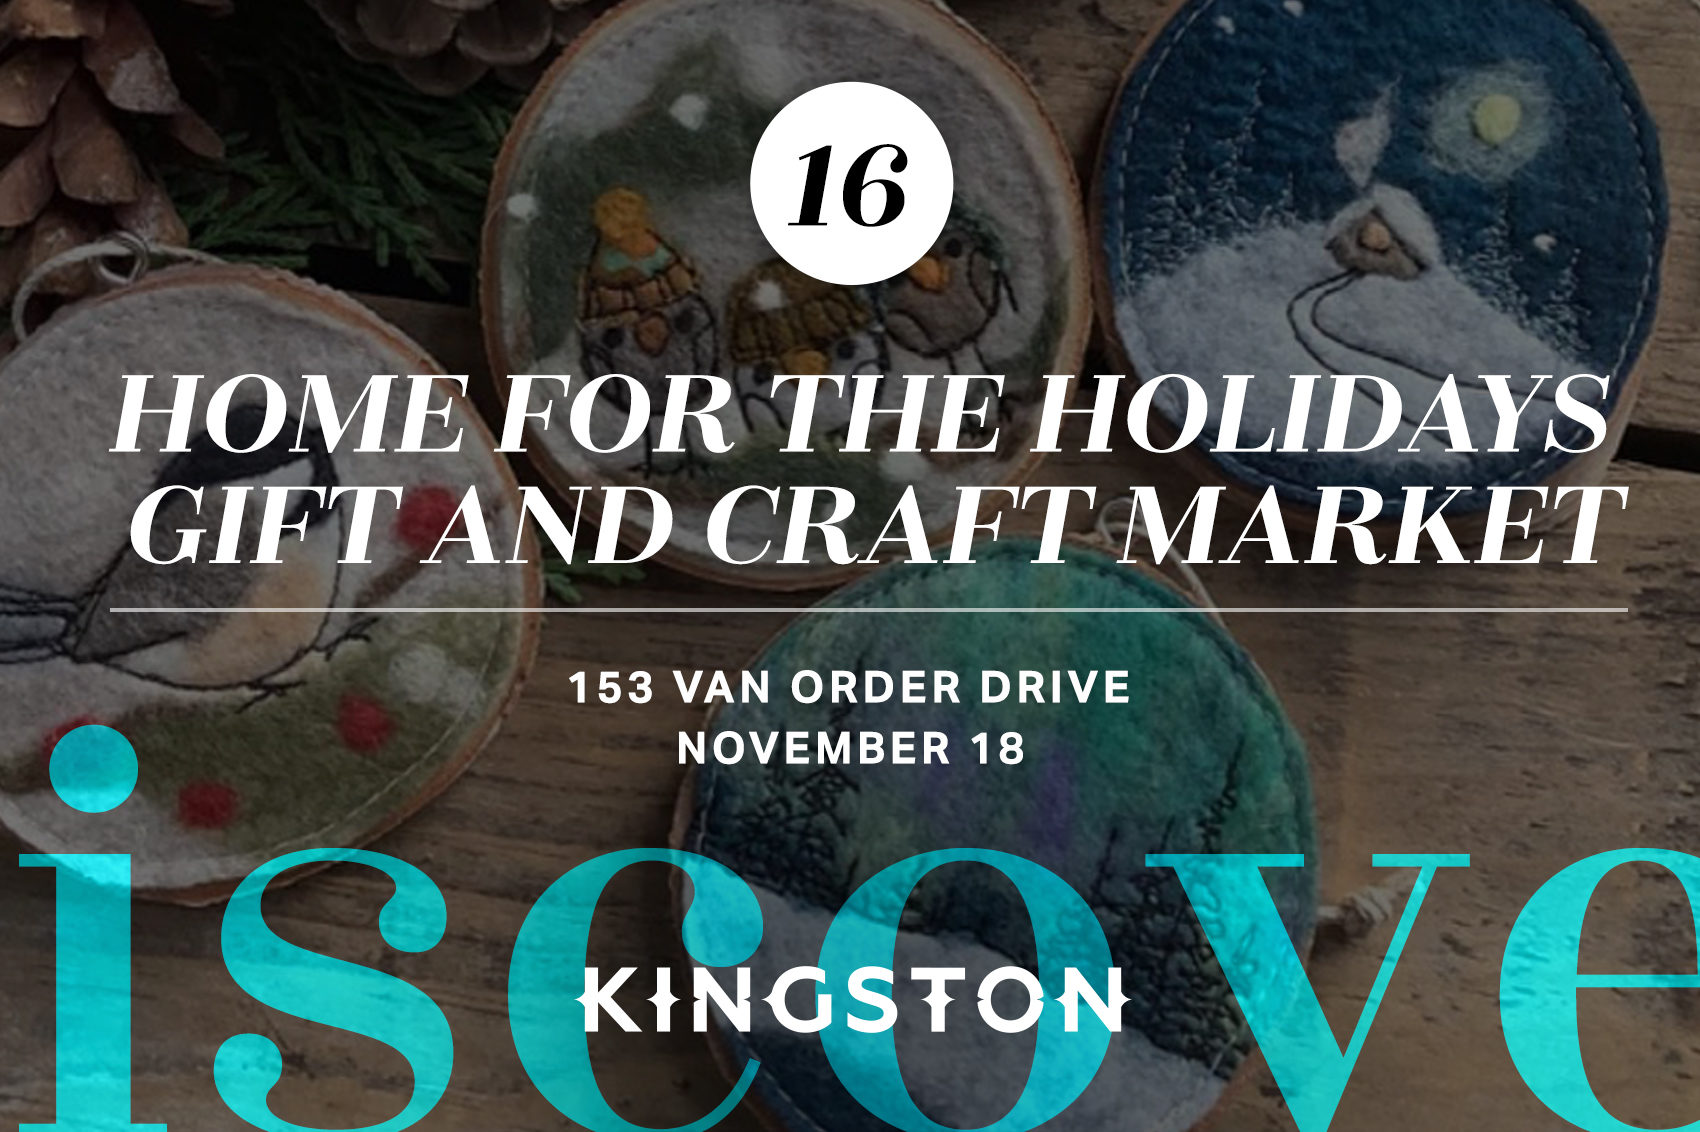 Home for the holidays gift and craft market